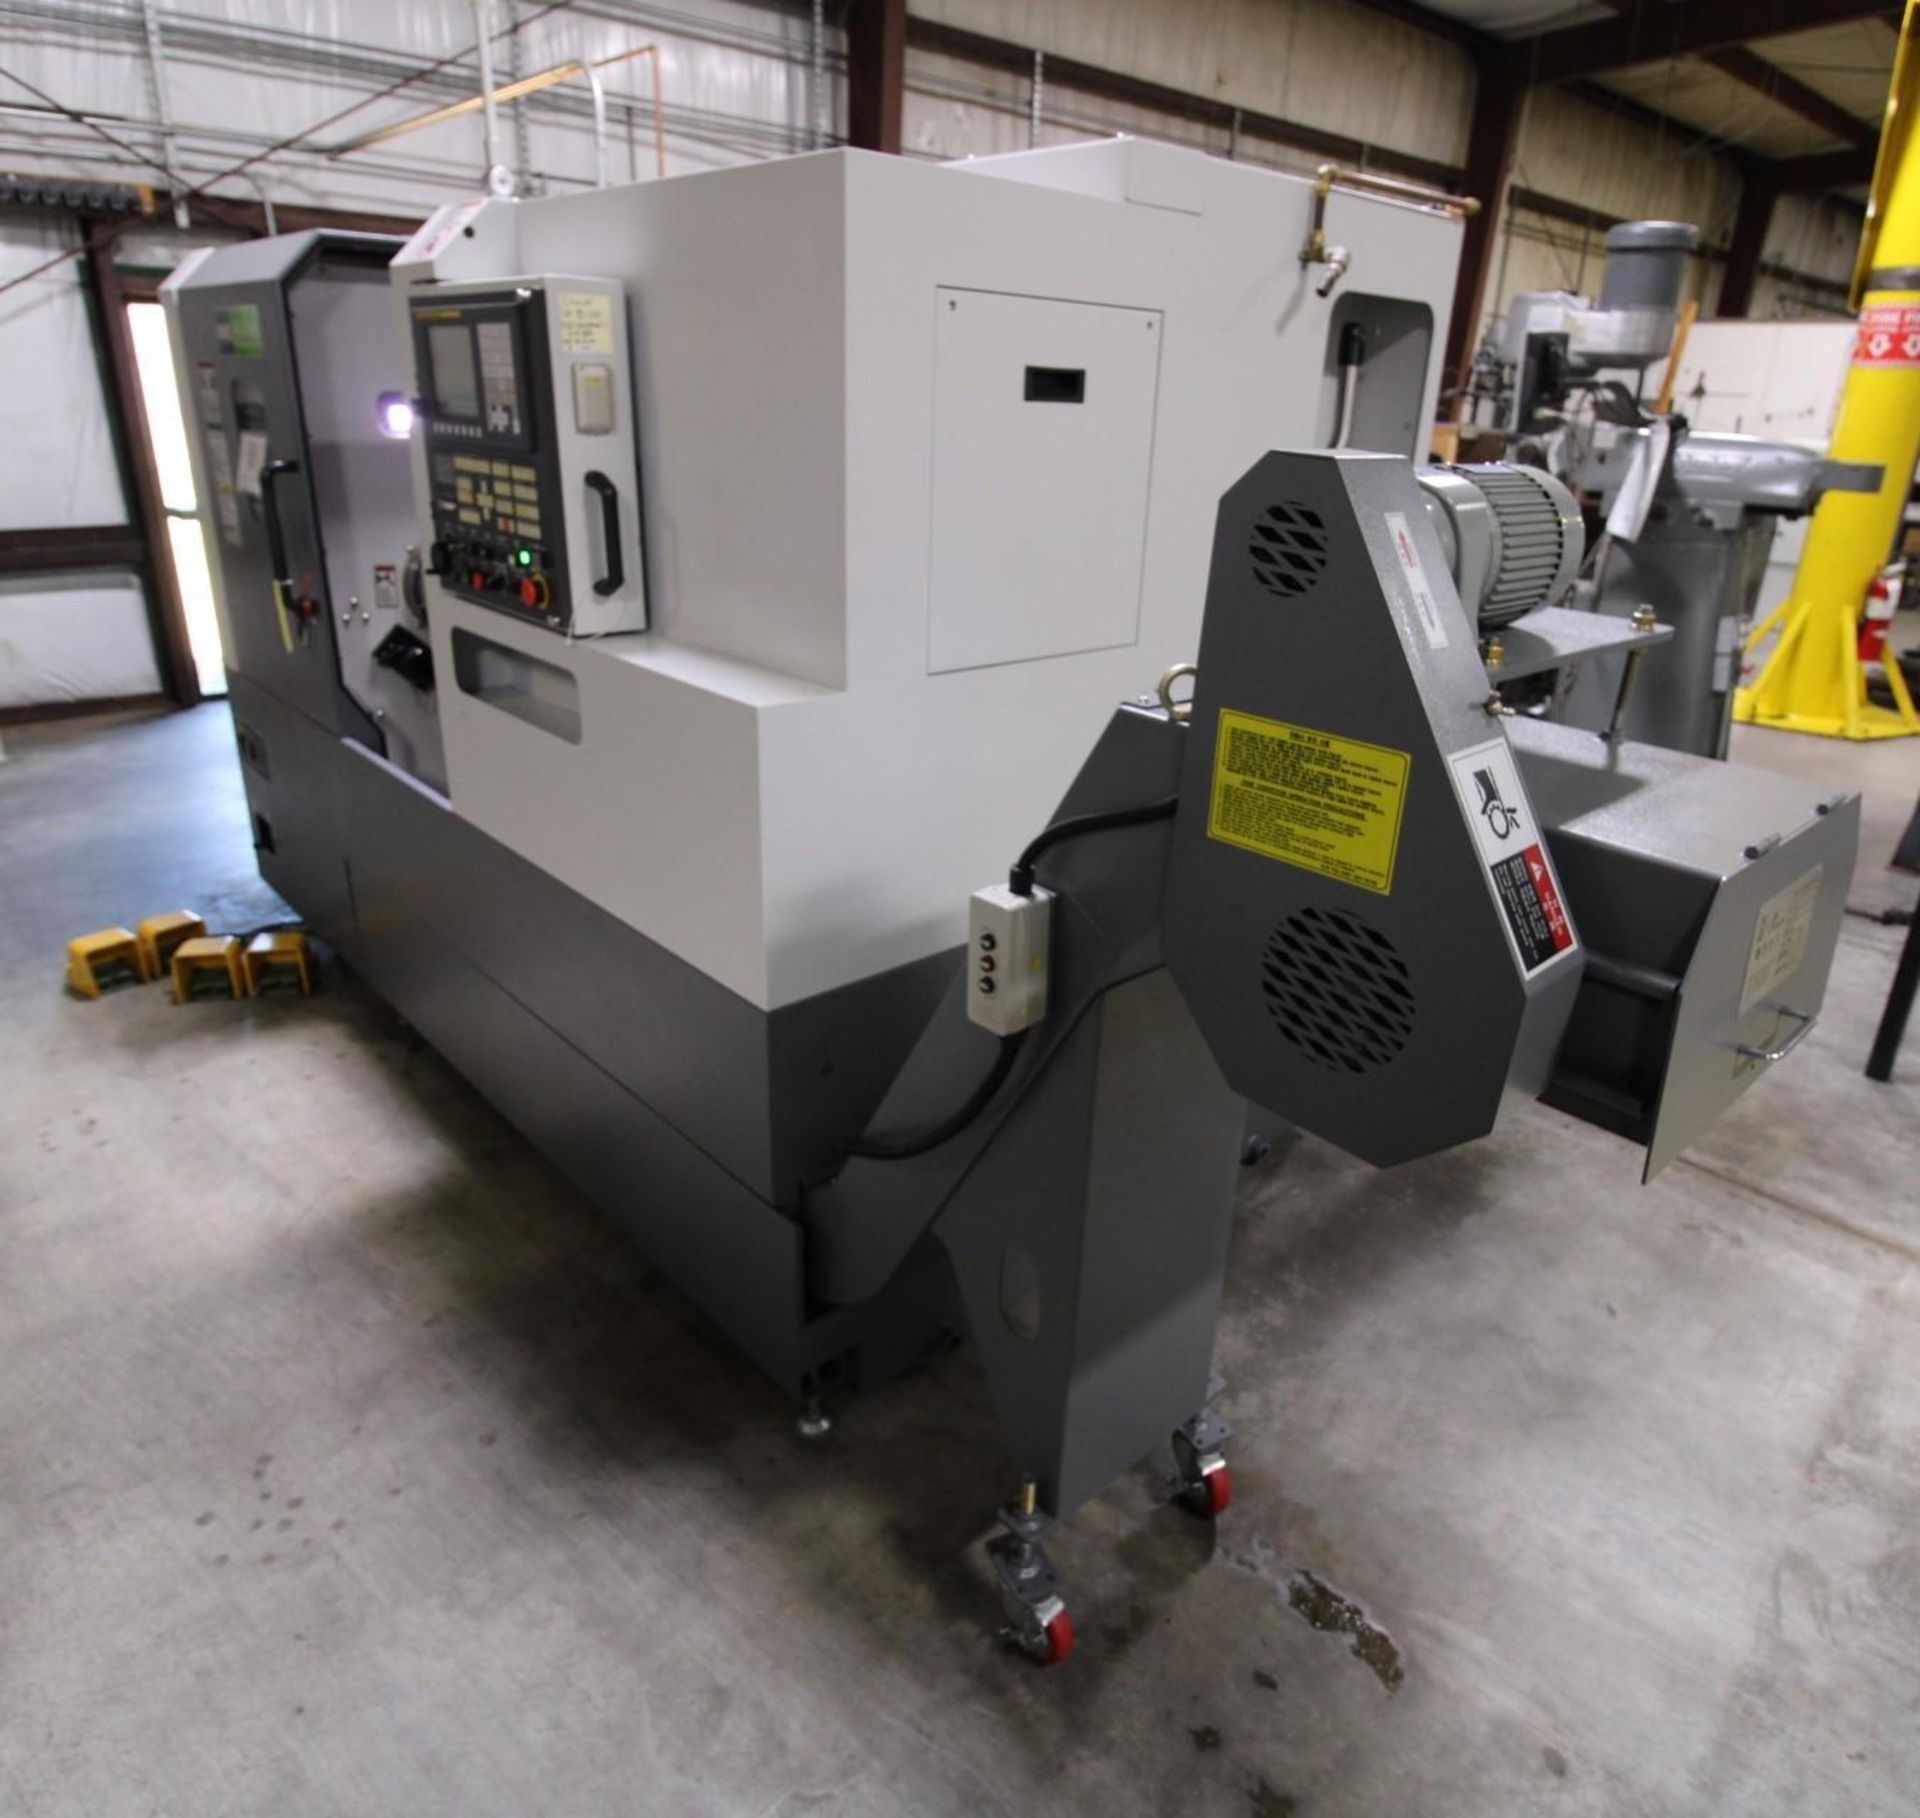 CNC LATHE, DMC MDL. DL-21LA, new 2013, installed as new in 2018, Fanuc Oi-TD control, 8” chuck, 12- - Image 3 of 17